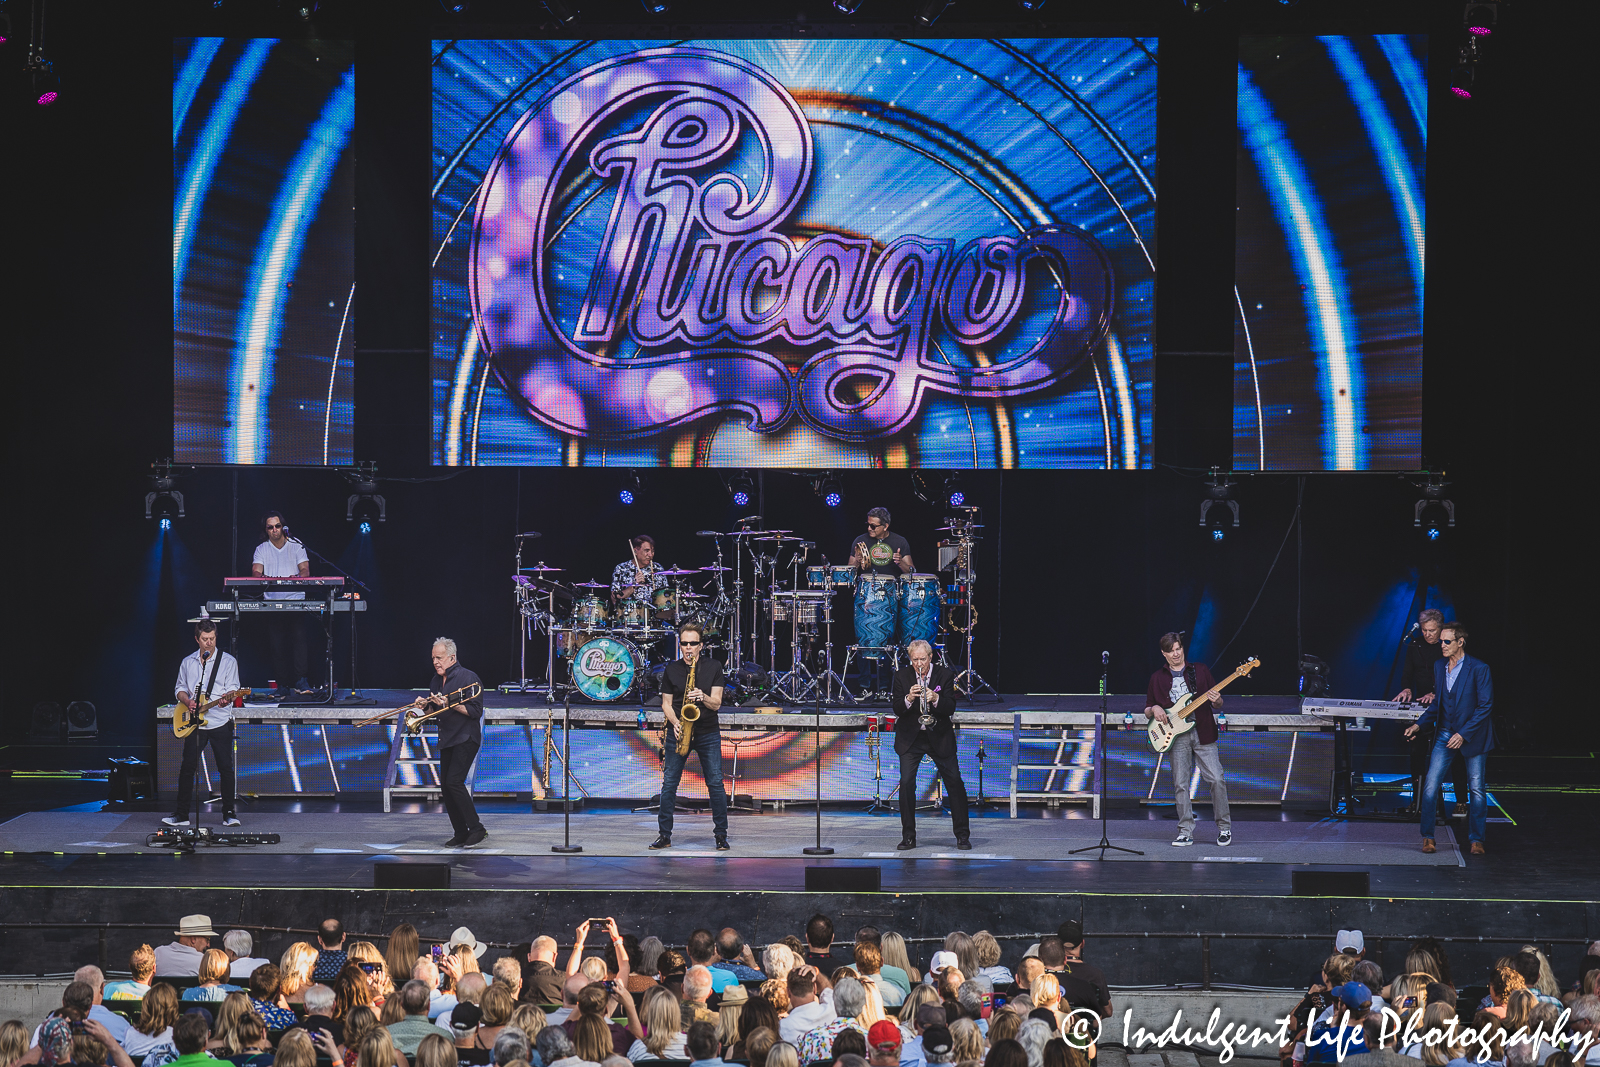 Starlight Theatre live concert in Kansas City, MO featuring rock band Chicago on May 26, 2023.